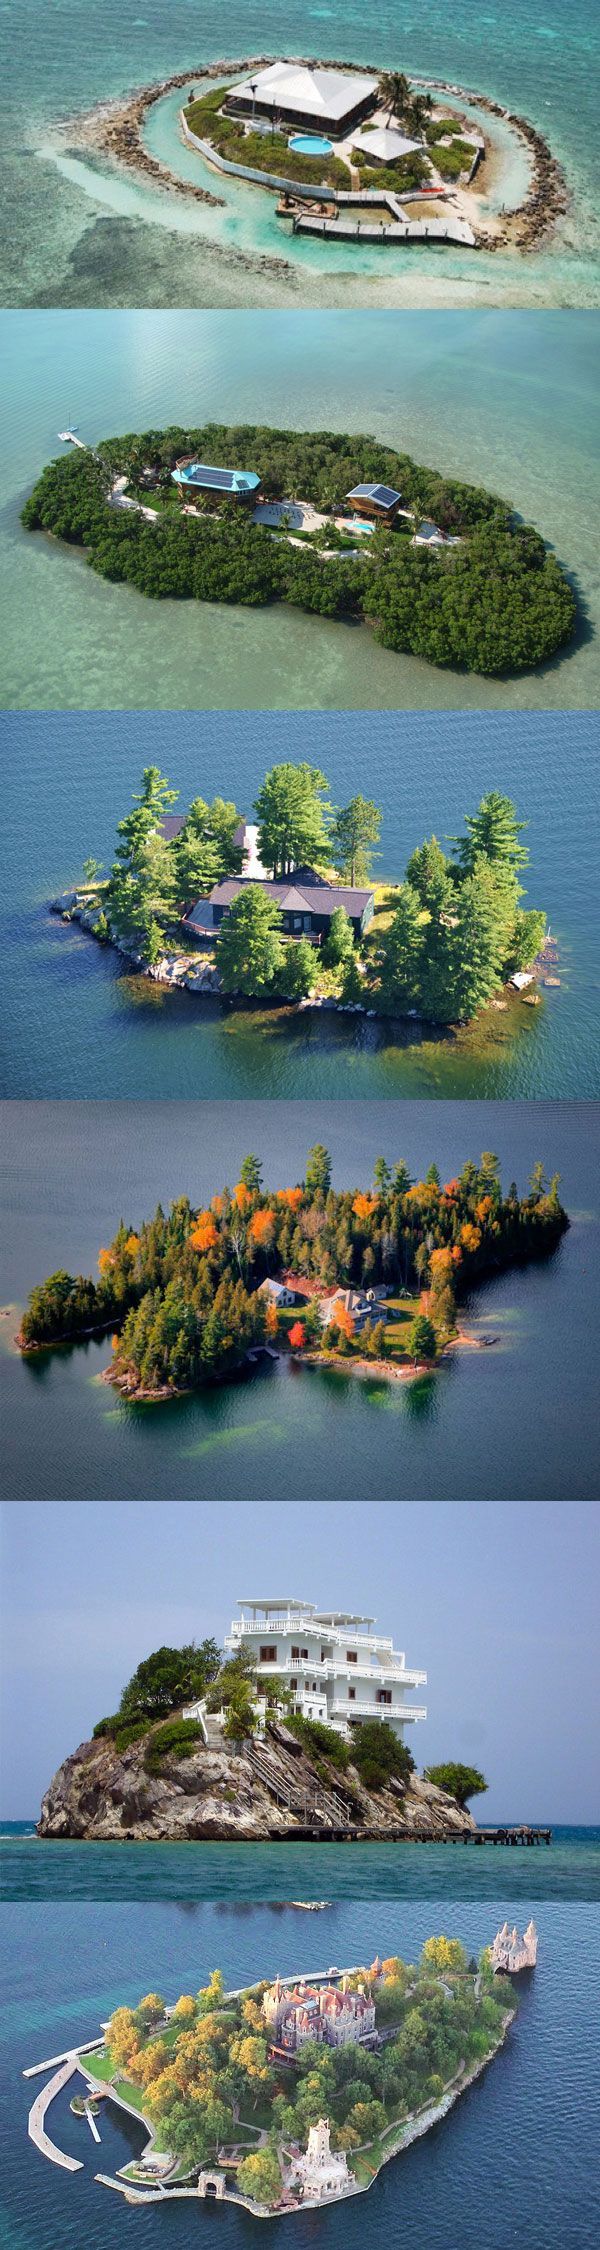 Homes built on private islands… All problems solved buy big island with bridge to mainland / docks / air strip / privite train